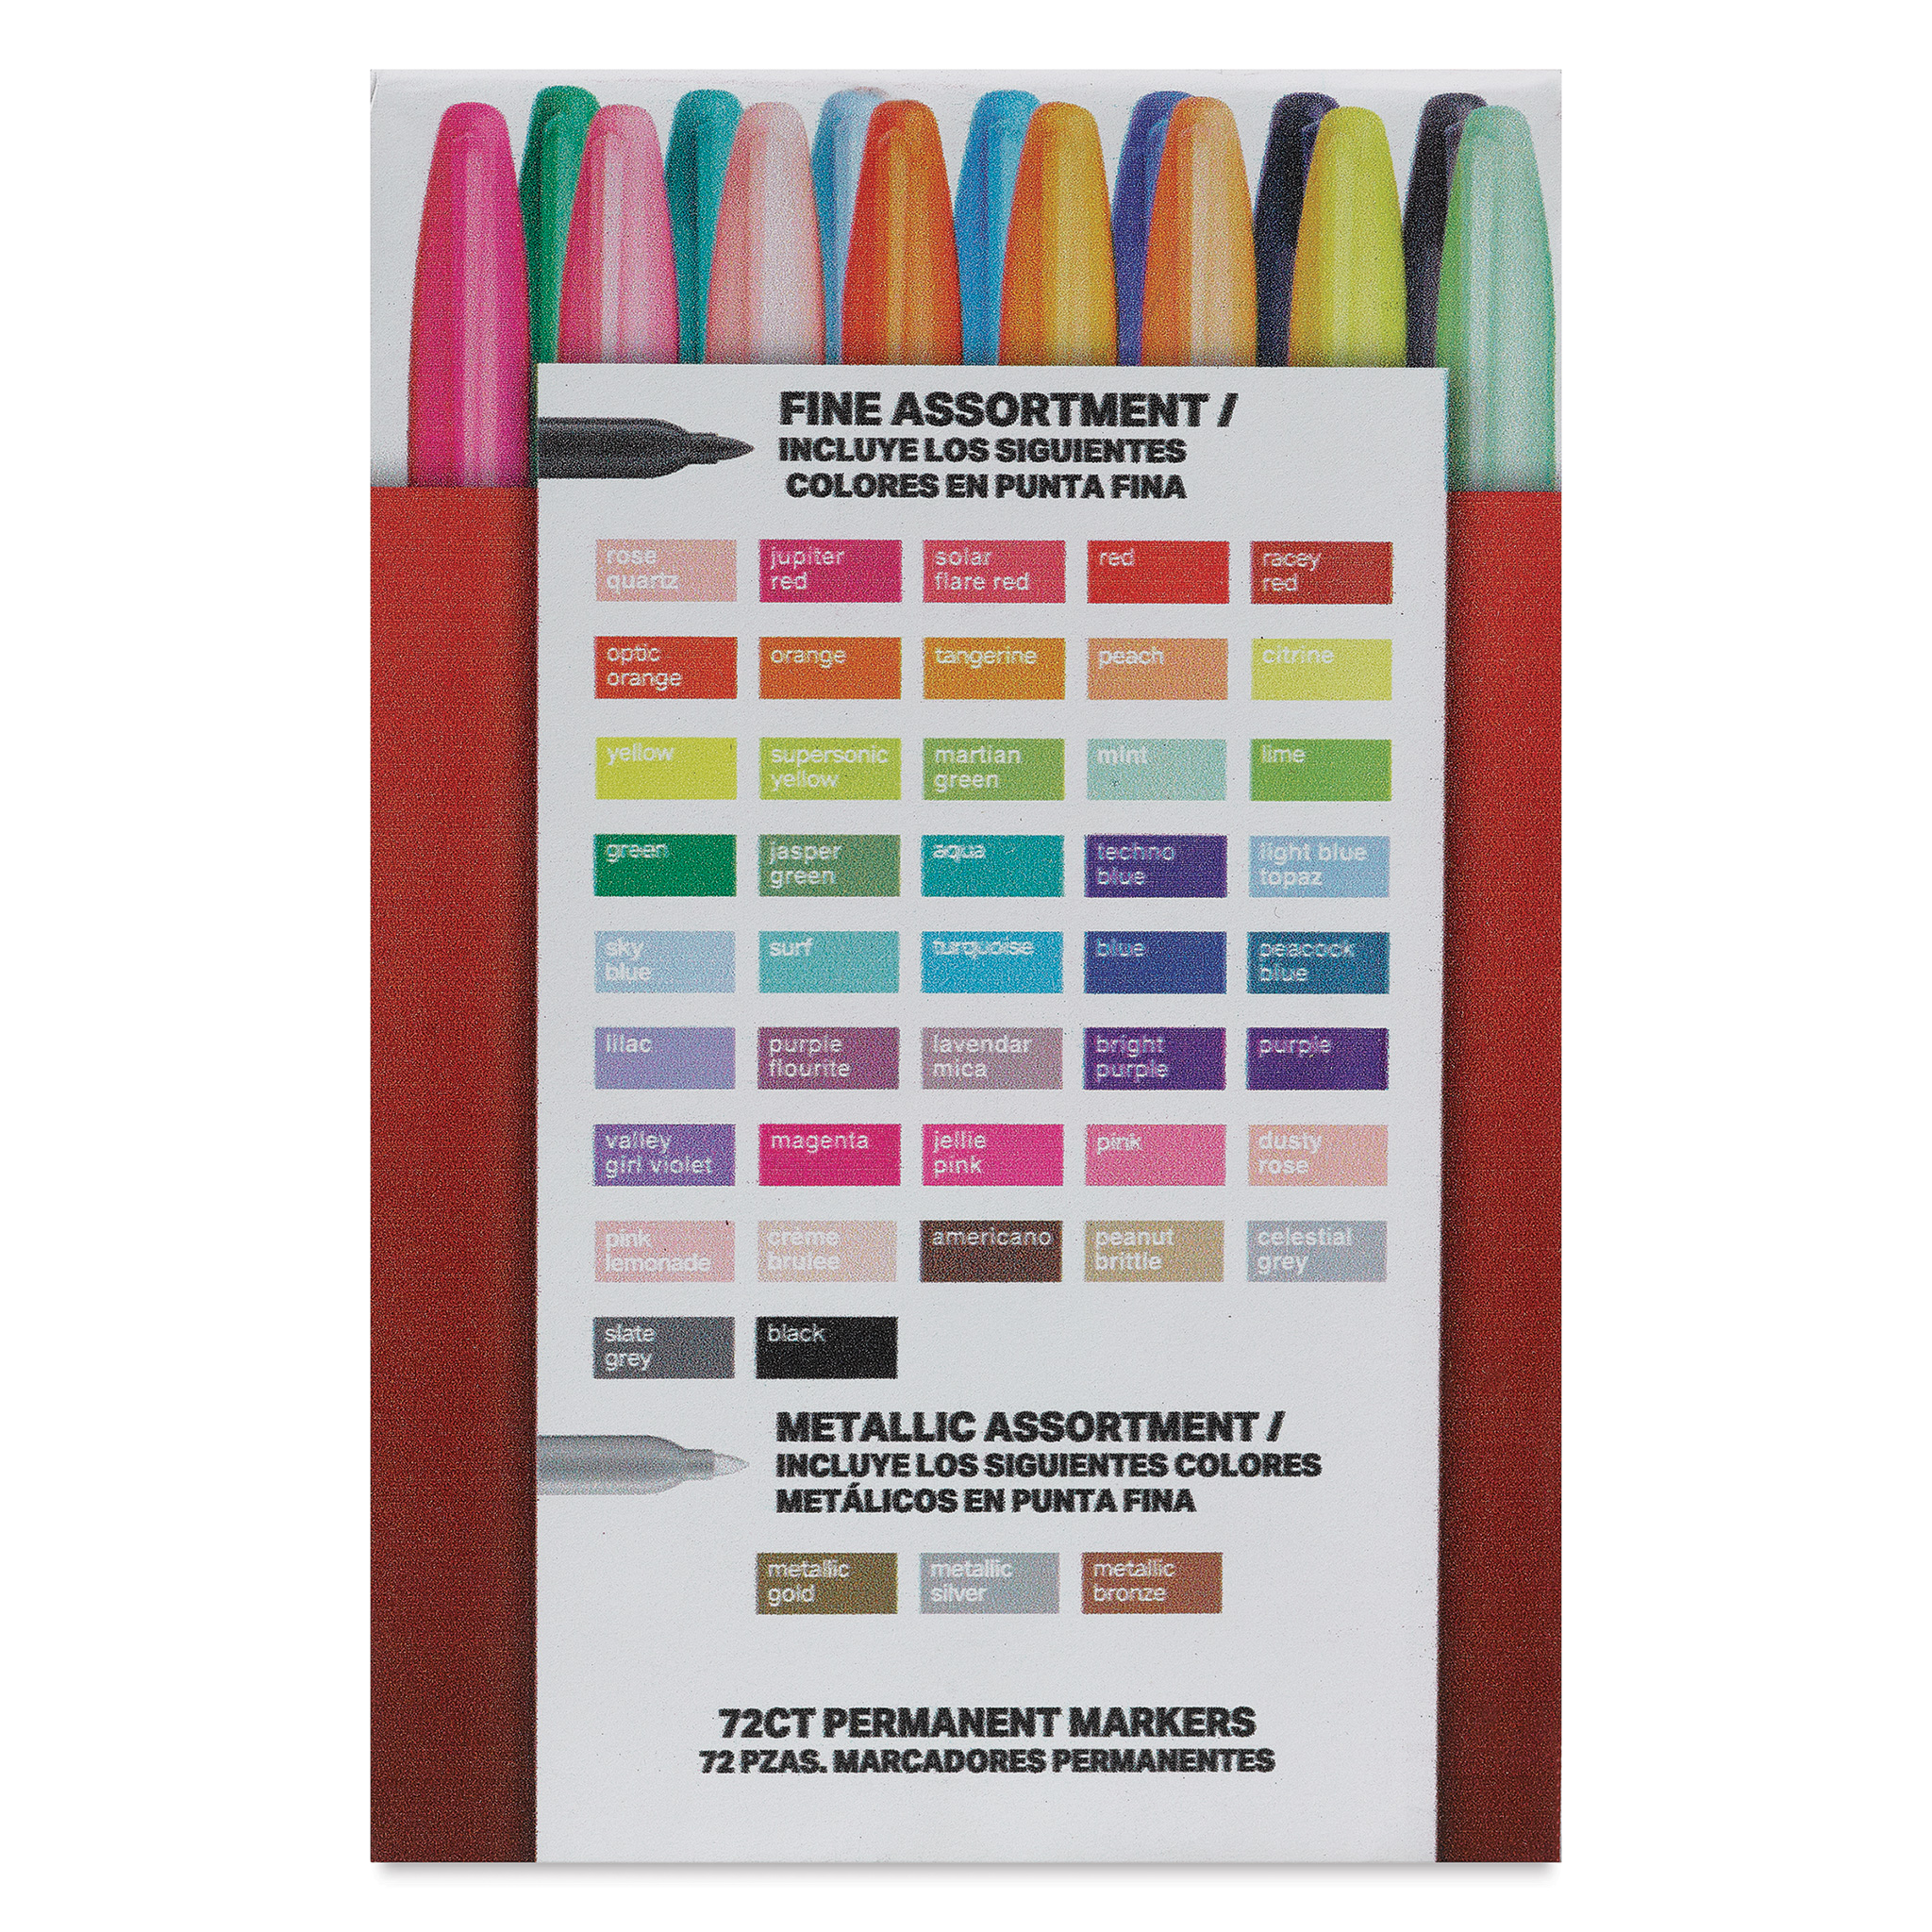 Sharpie Ultimate Collection Permanent Markers, Assorted Colors, 72 ct